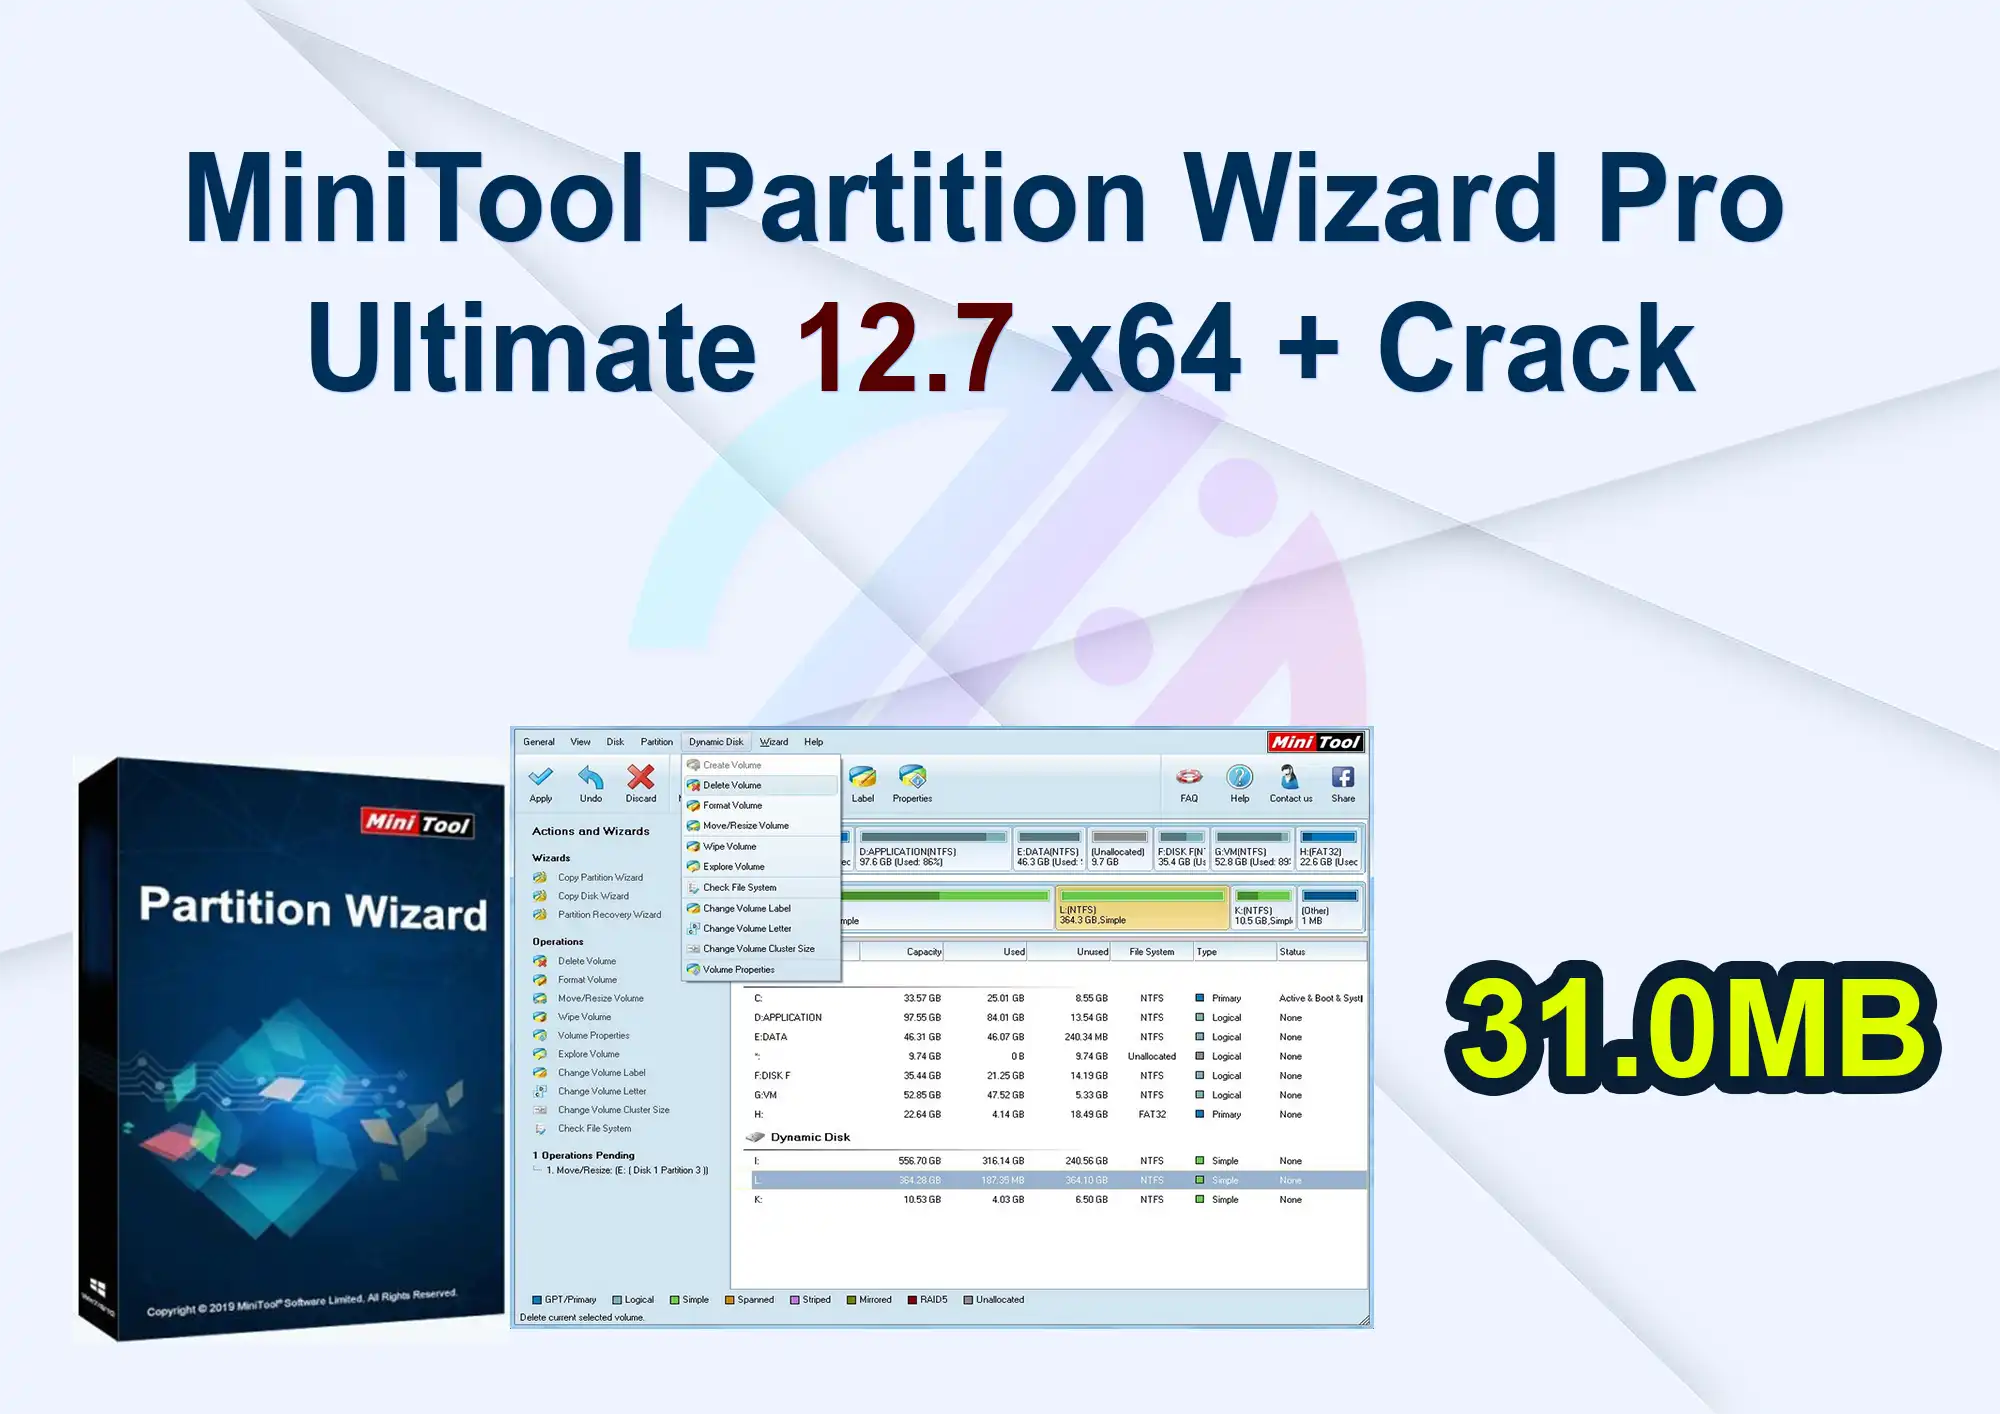 MiniTool Partition Wizard Pro Ultimate 12.7 x64 + Crack